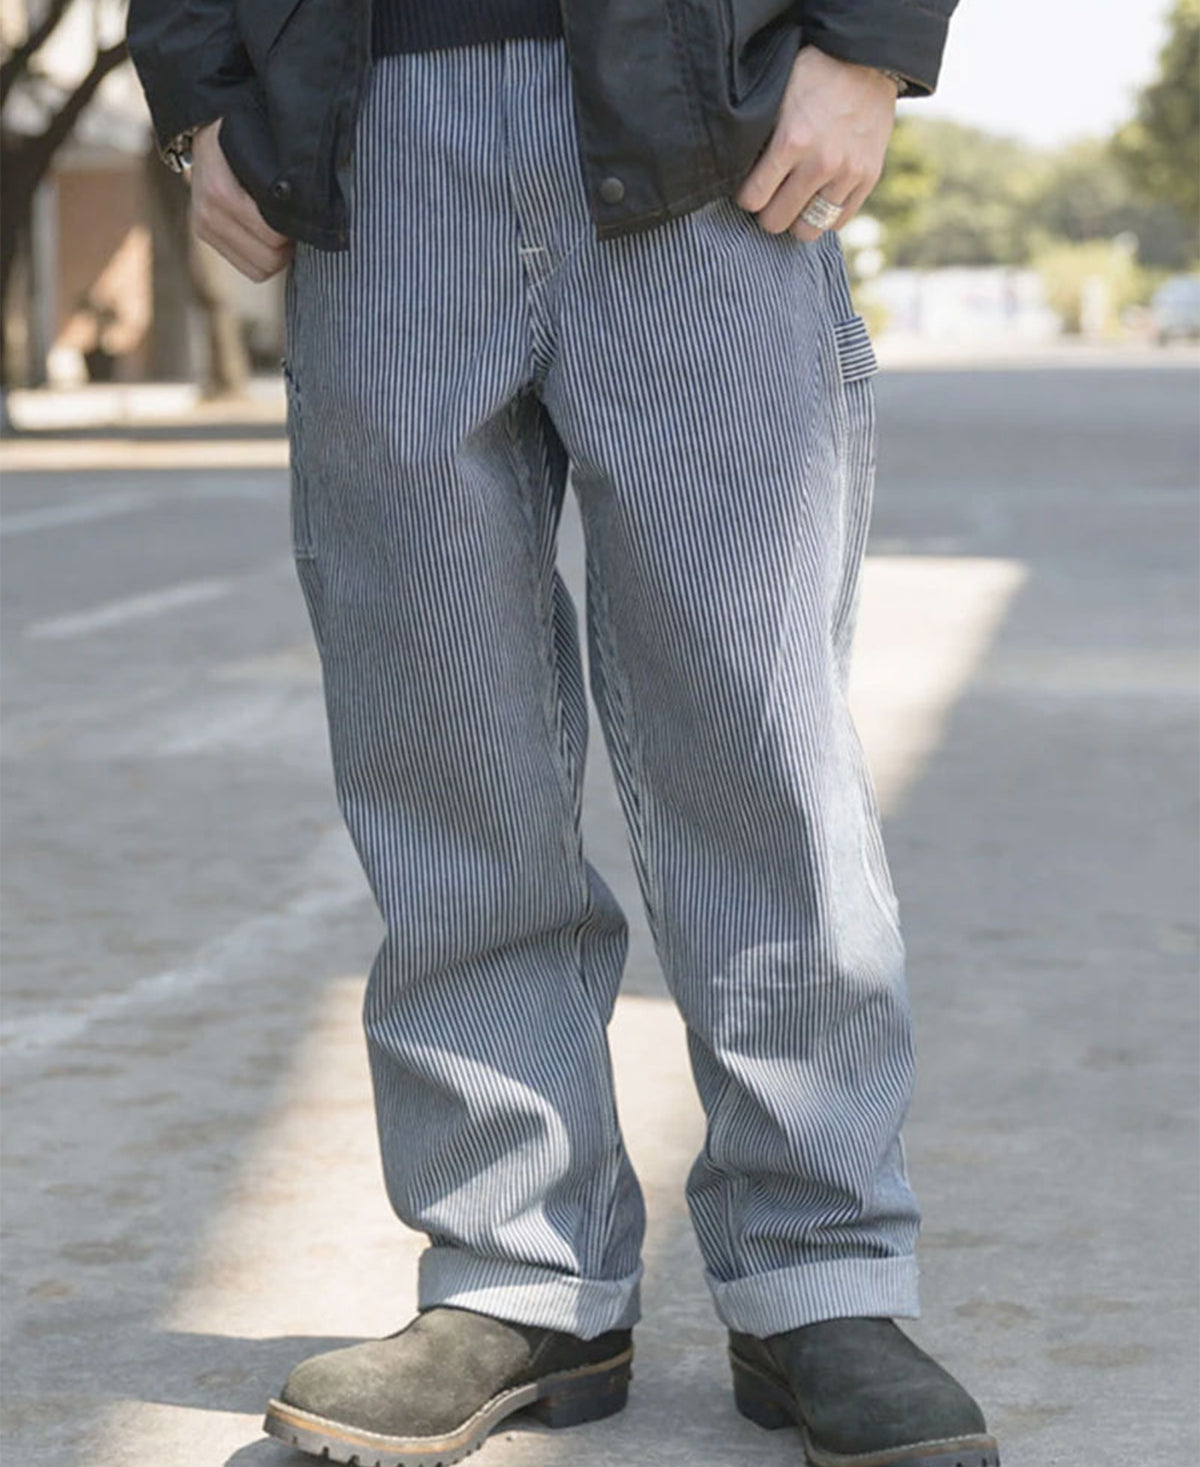 Basic Hickory Stripe Worker Overall Pants